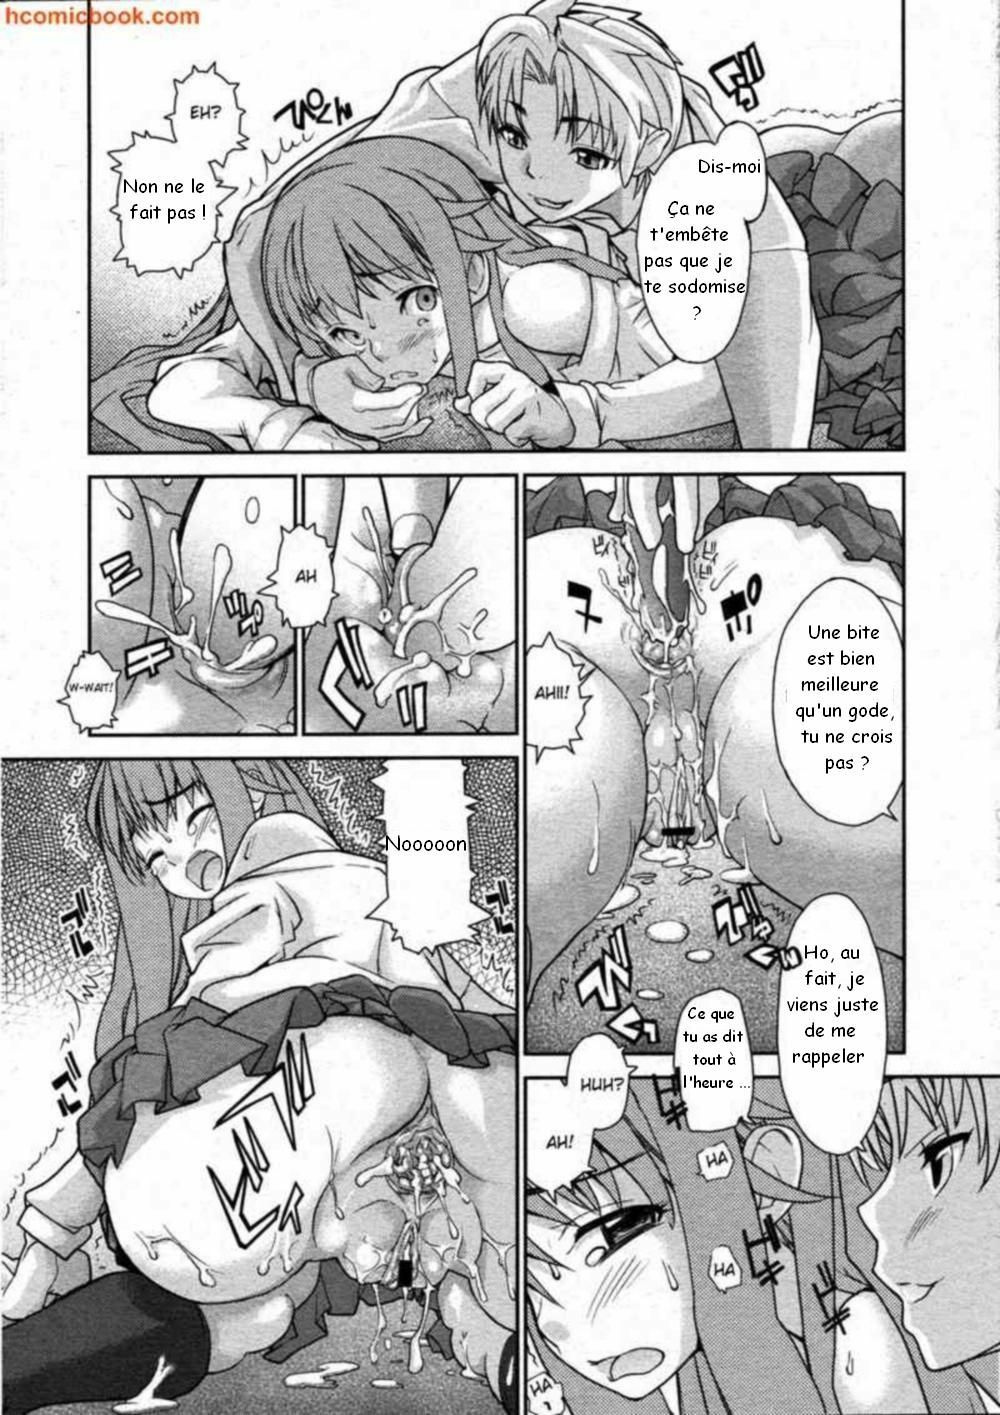 [French] Wiss Ass chapitre 1 et 2 page 33 full